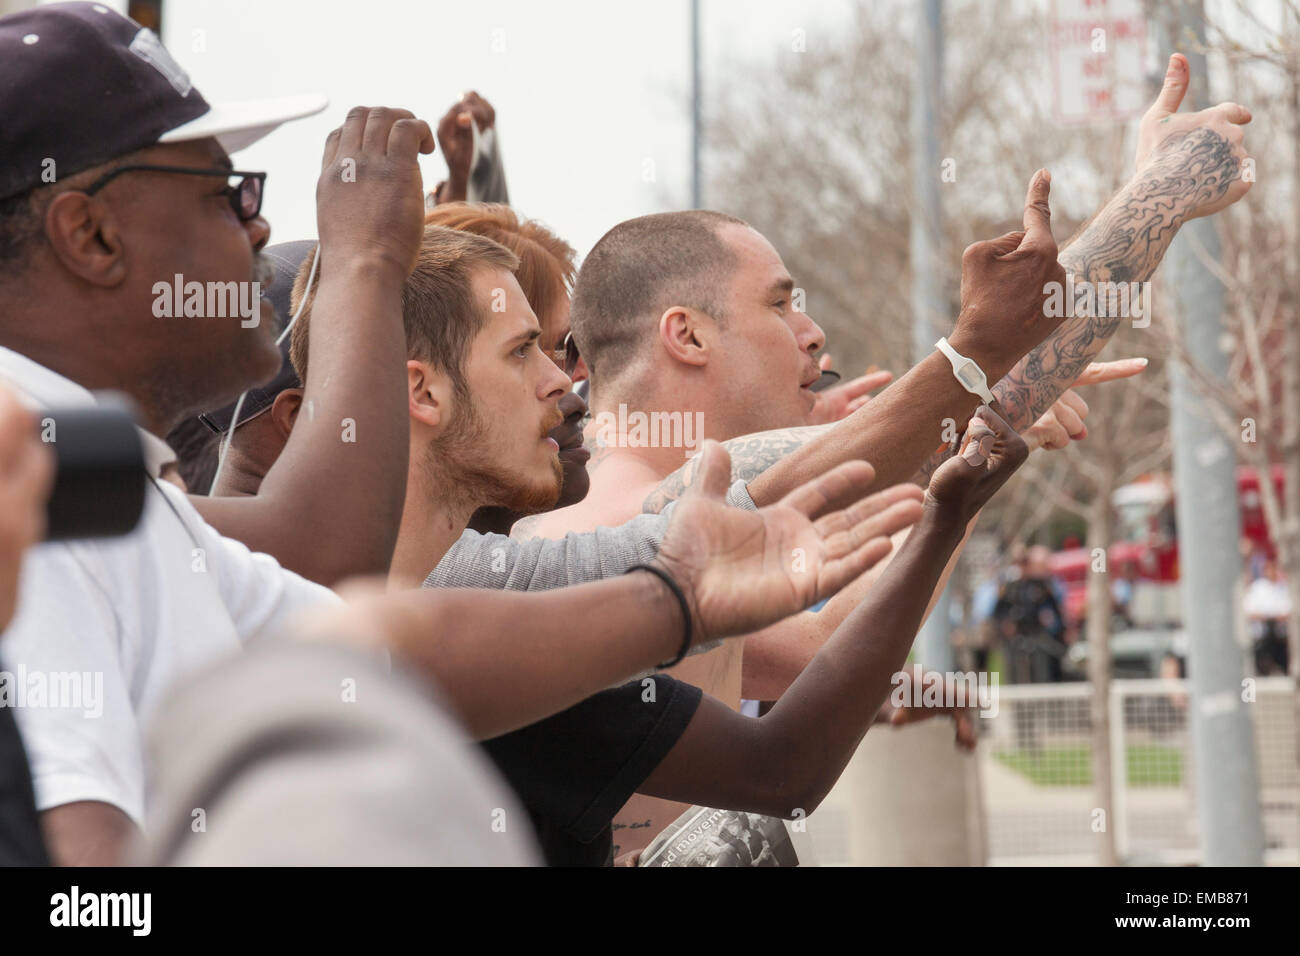 Toledo, Ohio USA - 18 April 2015 - Several hundred people turned out to protest as the neo-Nazi National Socialist Movement held a rally on the steps of the government office building. Credit:  Jim West/Alamy Live News Stock Photo